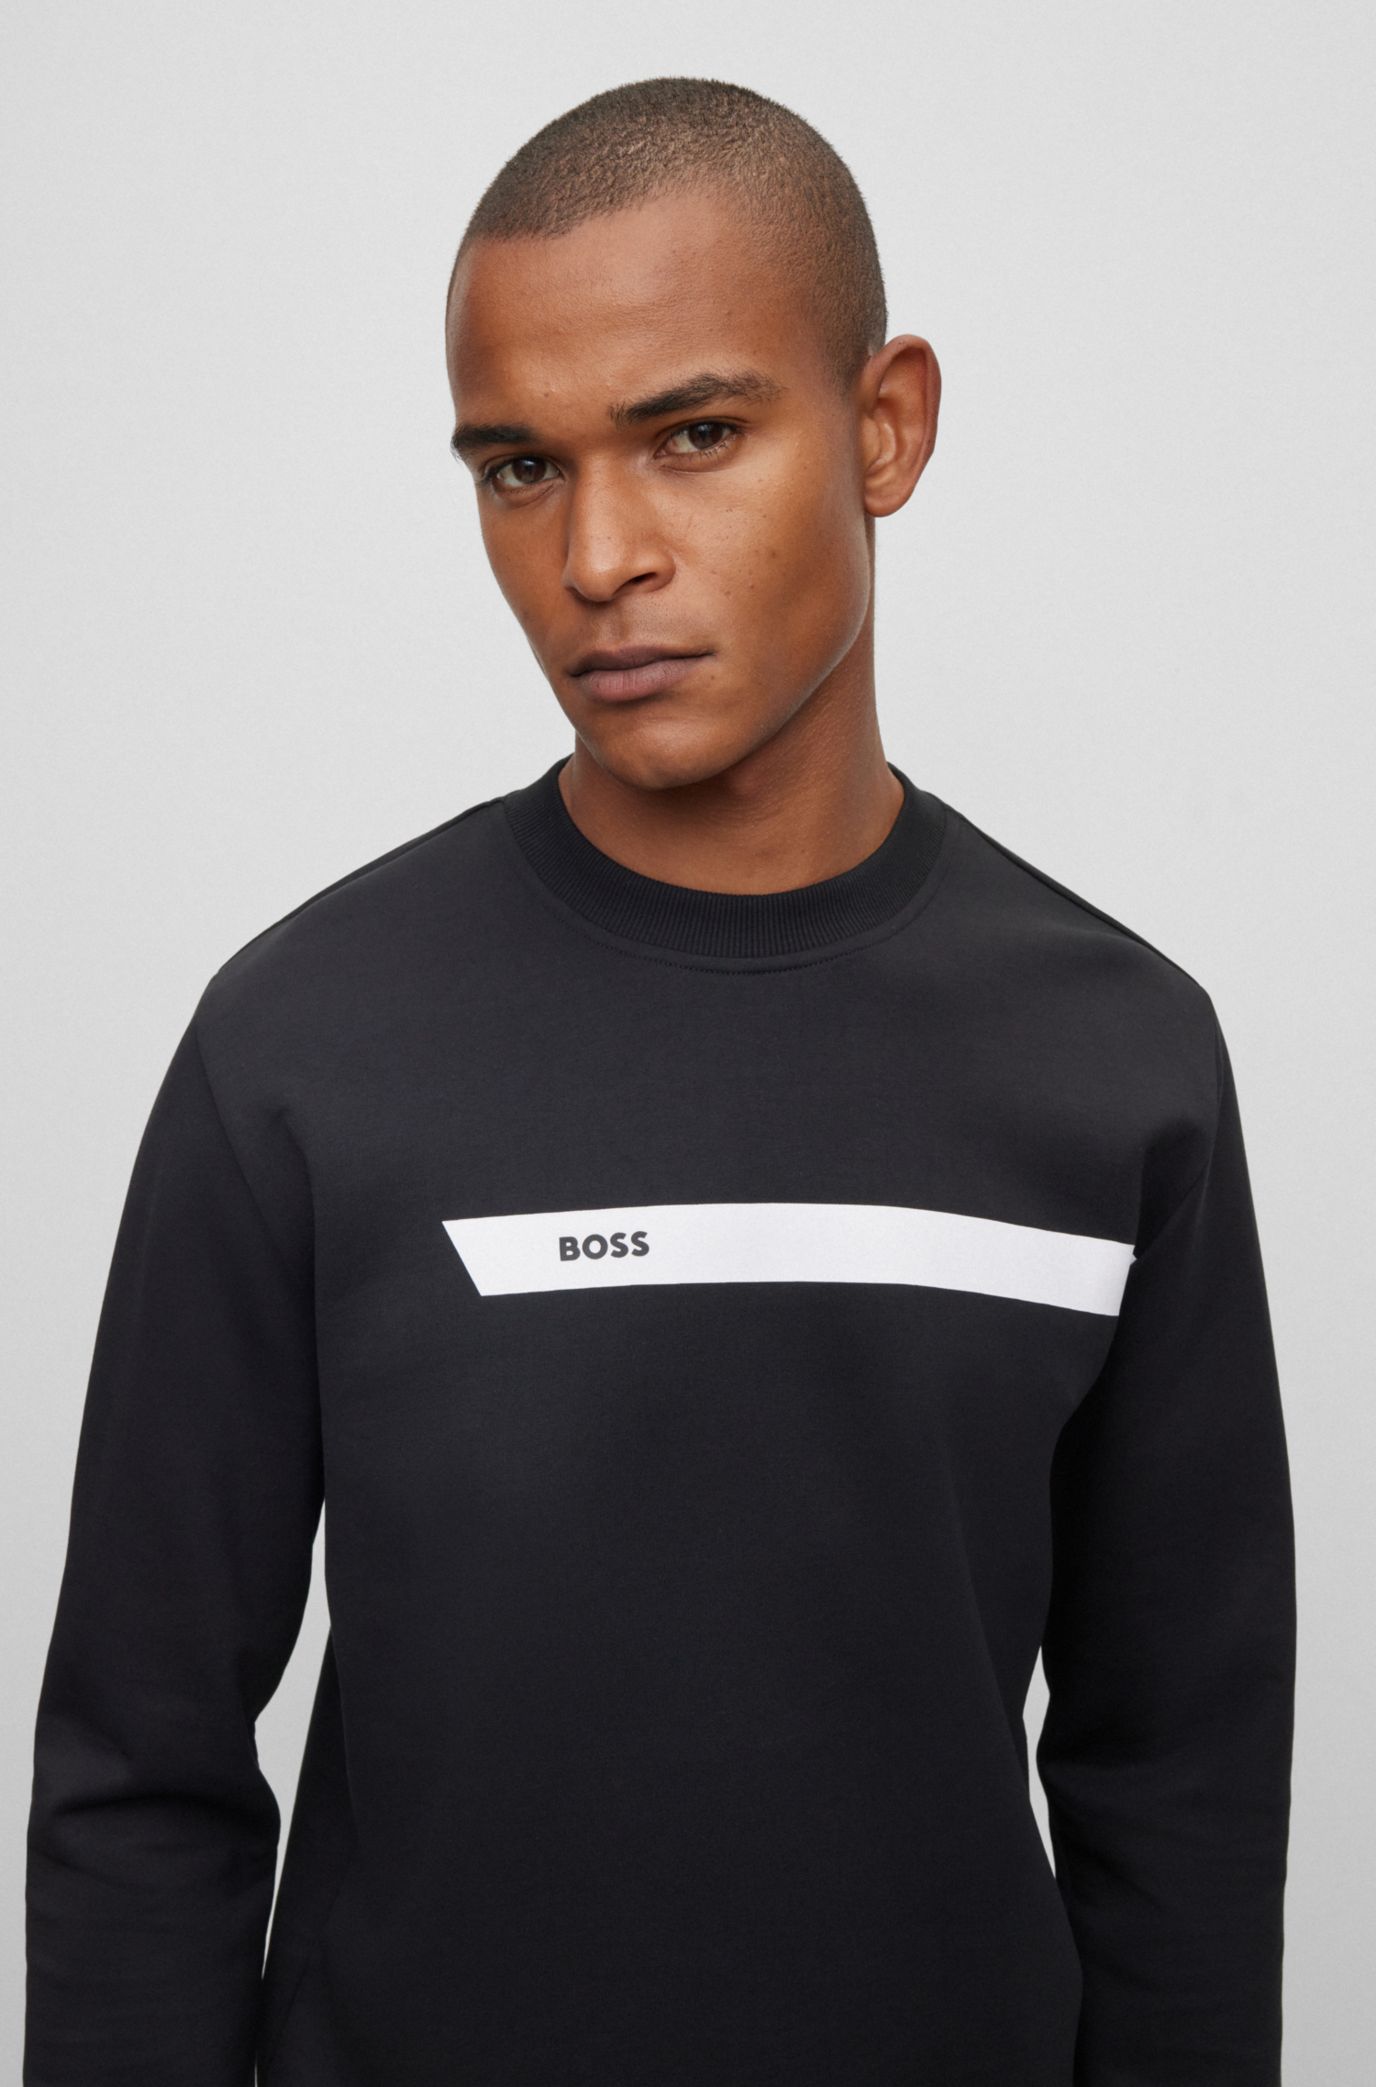 Hugo Boss X NBA Collection Shop 15% Off Email Signup